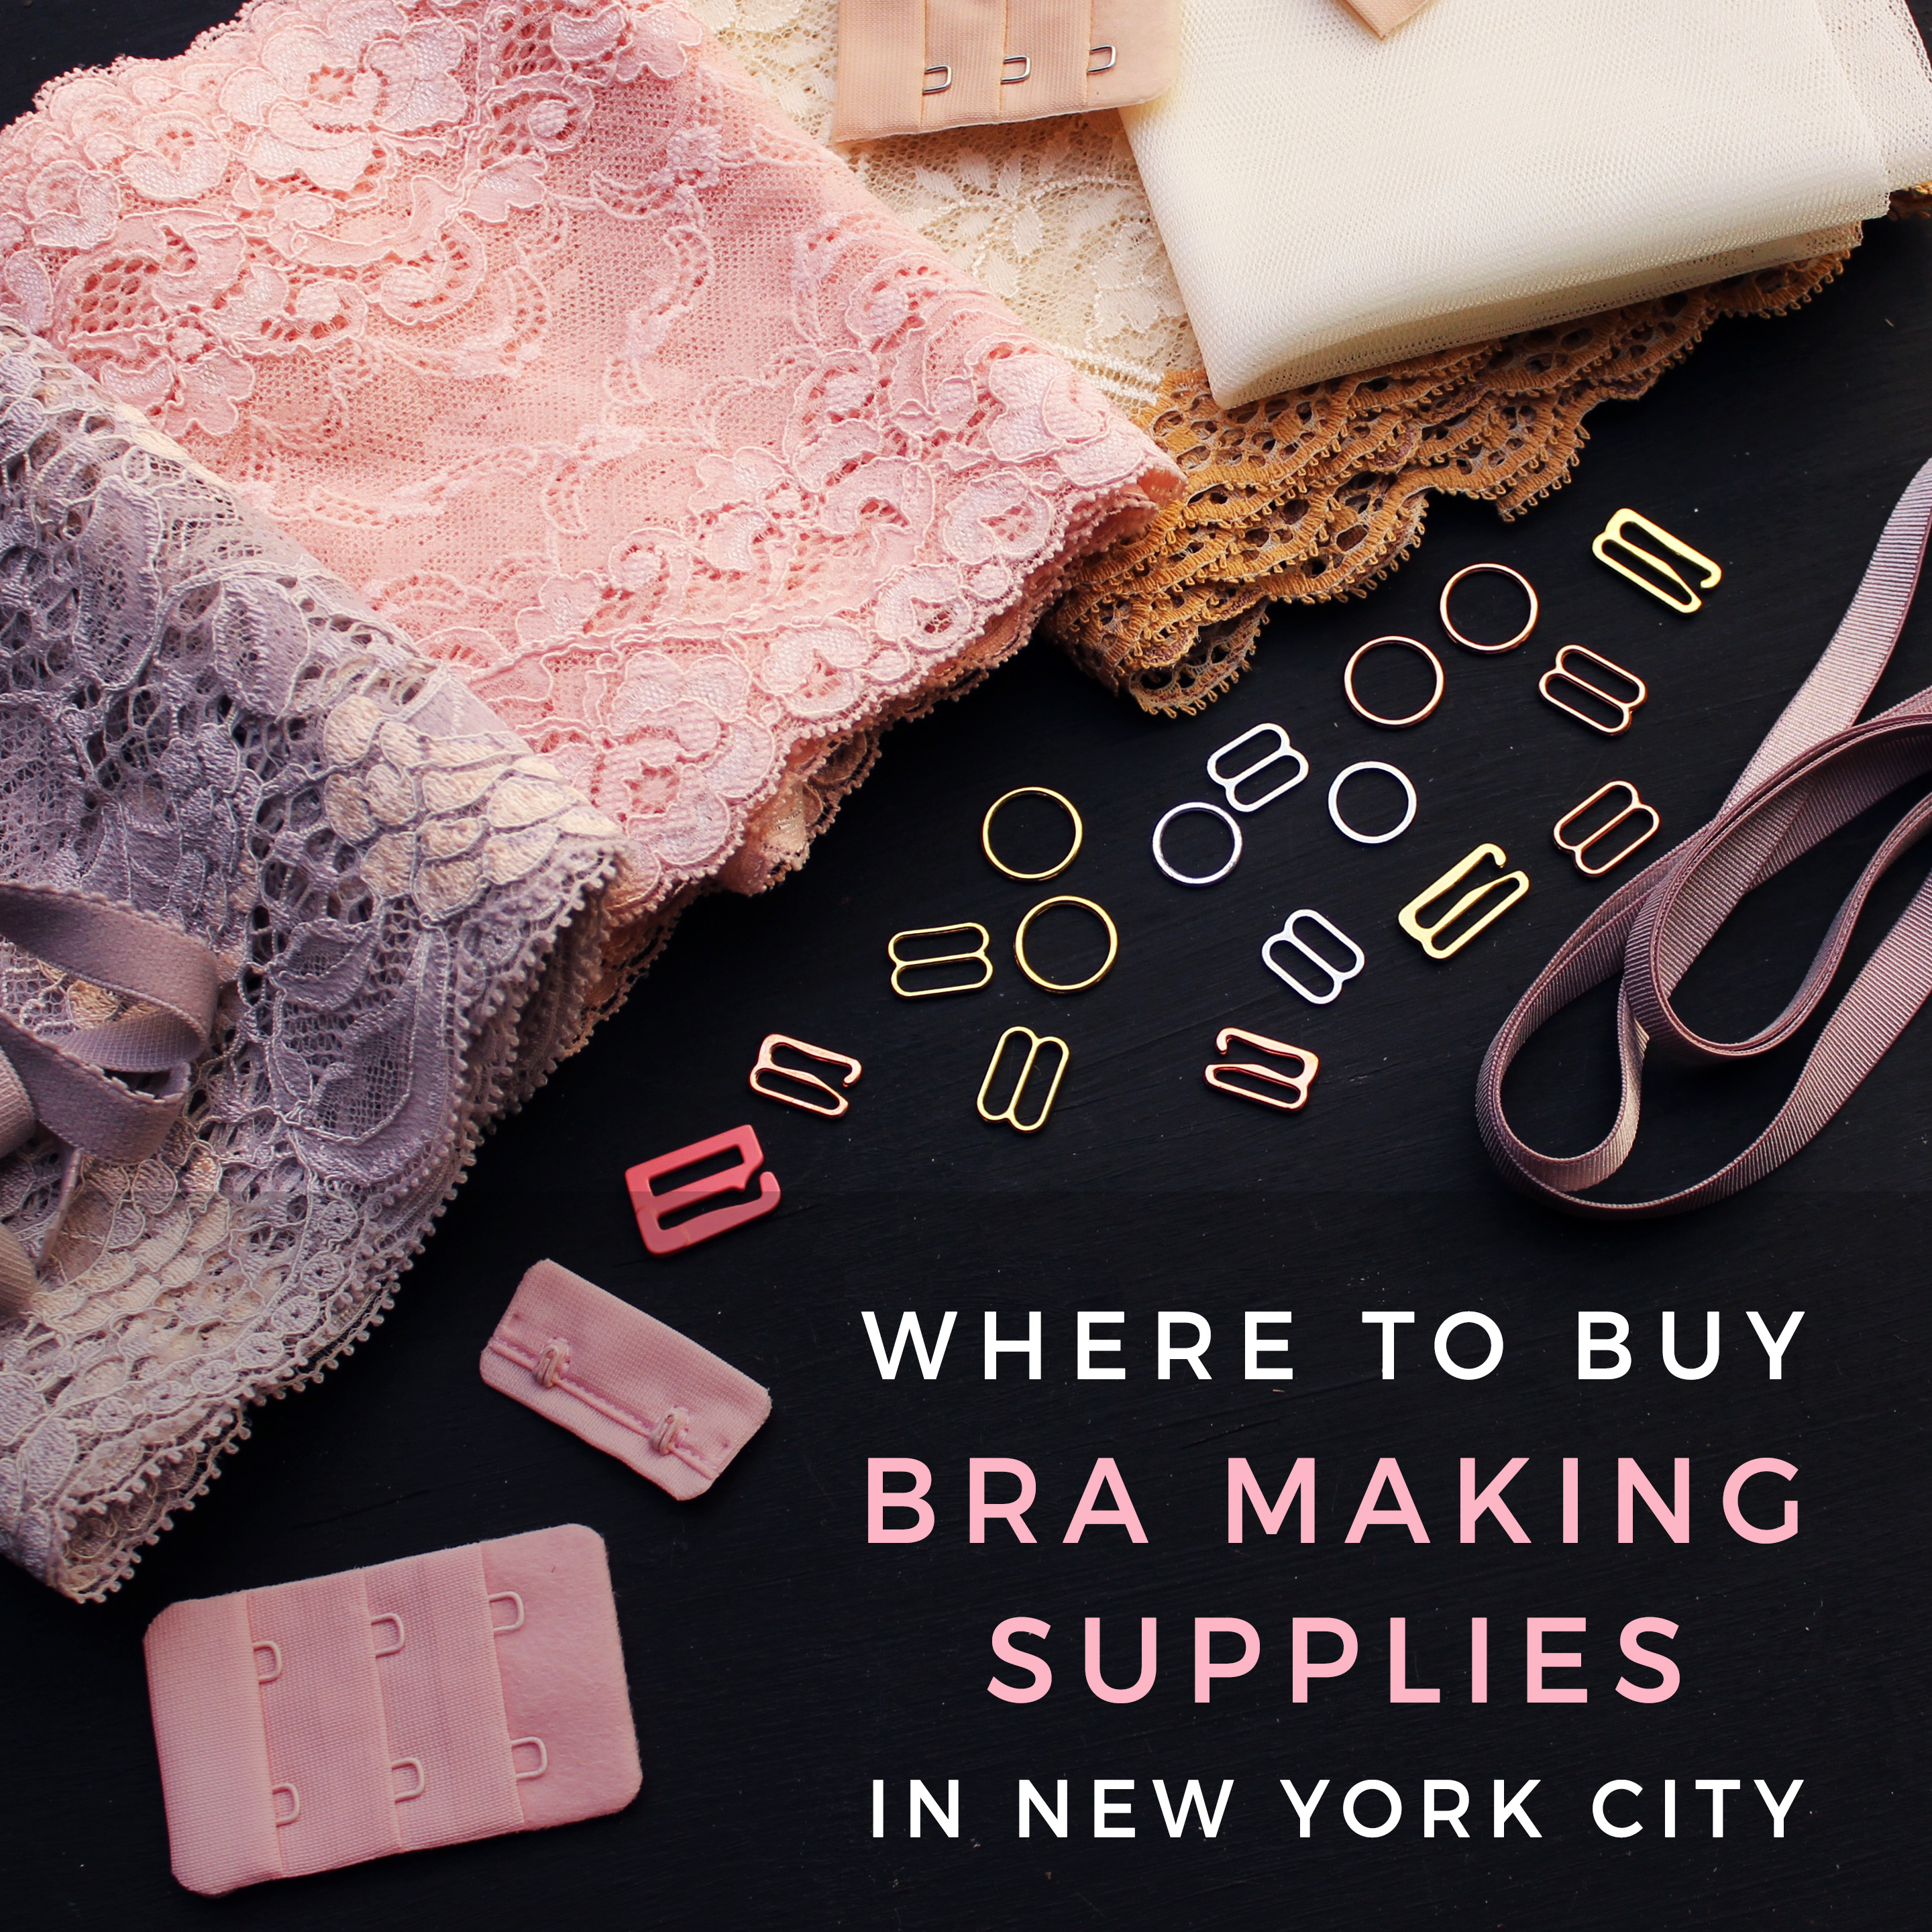 Where to Buy Bra Making Supplies in New York Garment District The Complete Guide to Bra Making